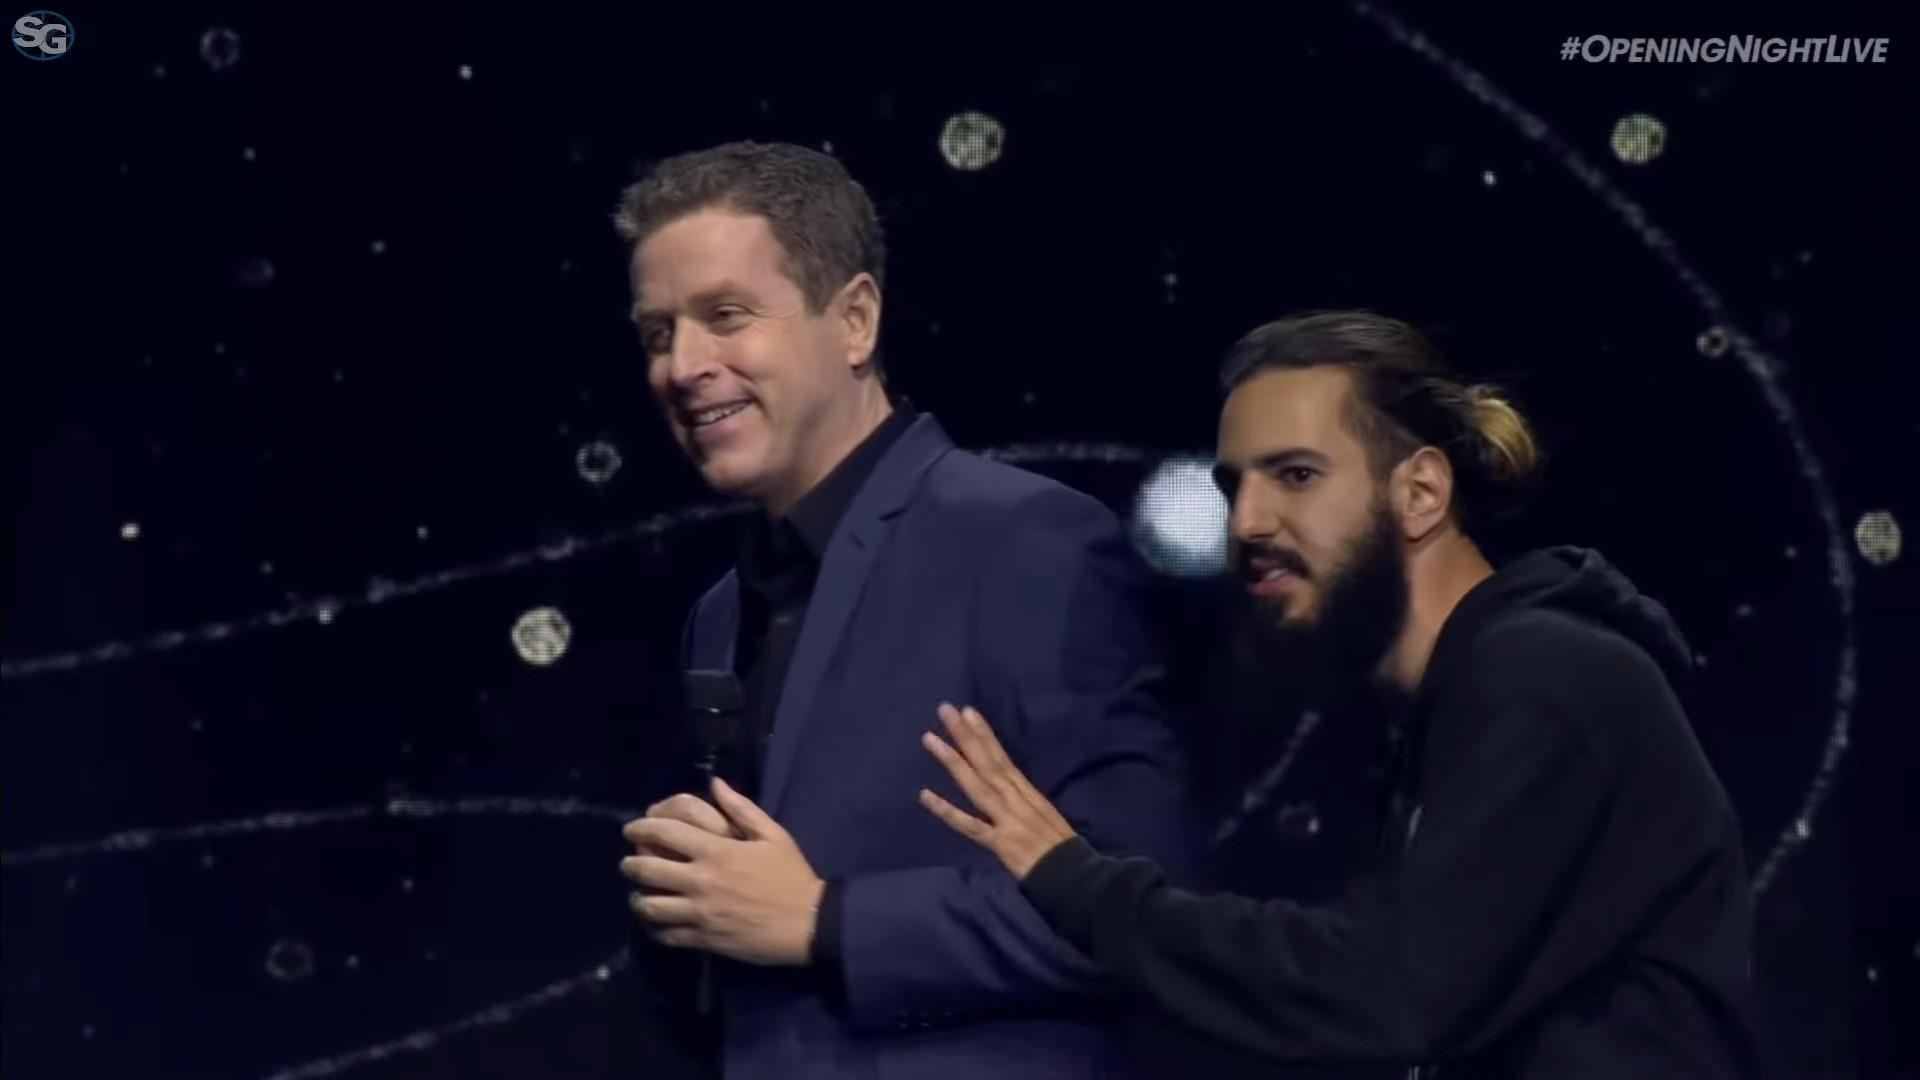 Matan Even of Game Awards Infamy Is Known for Stream Sniping